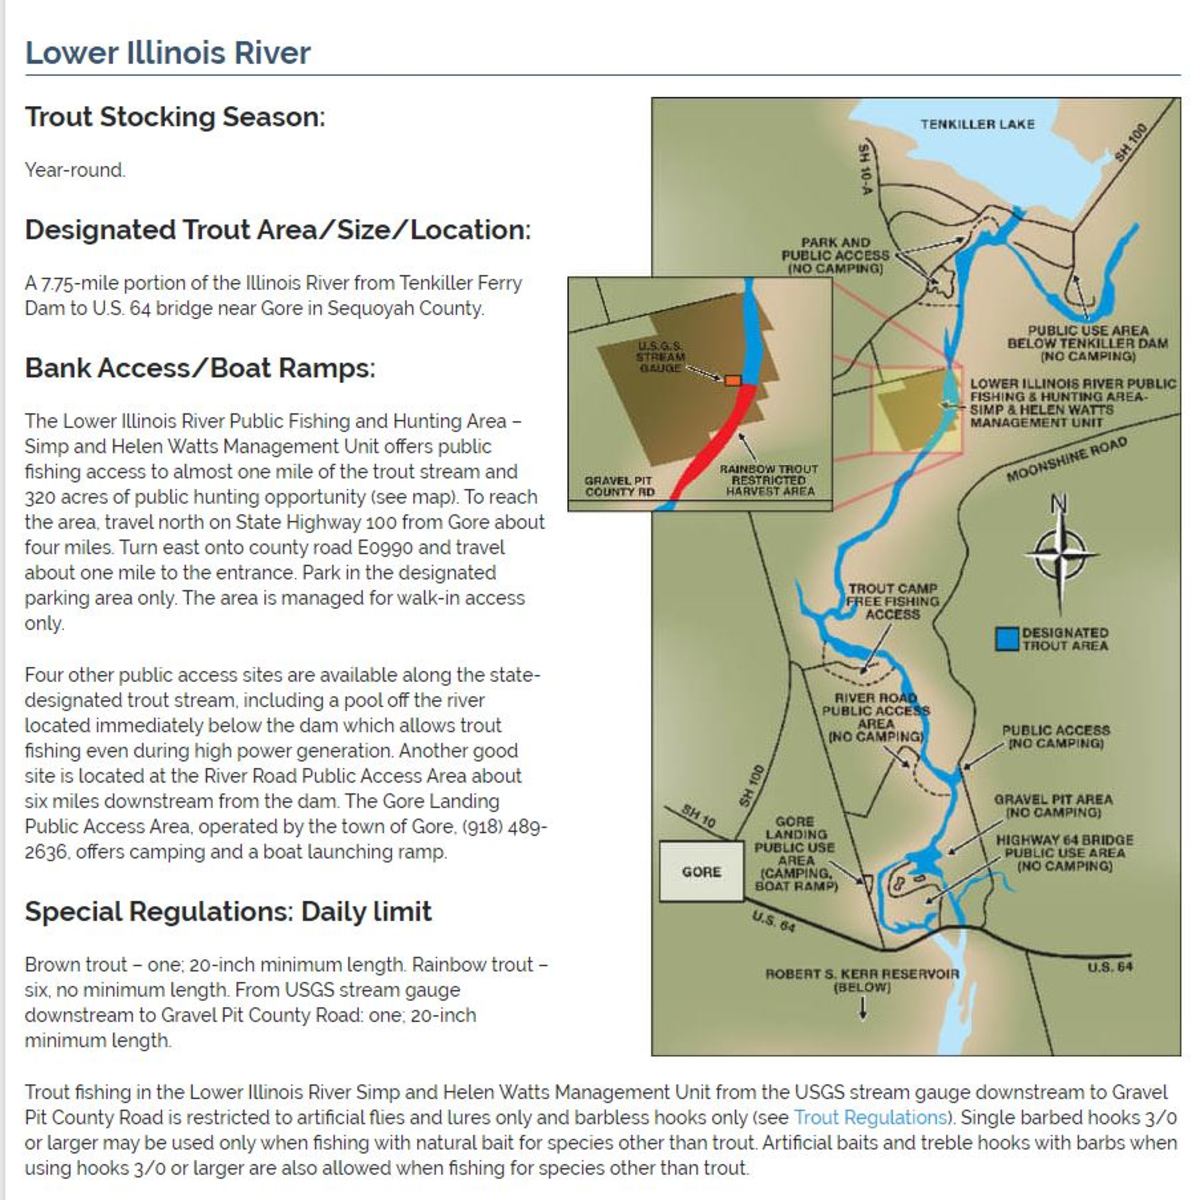 Retrieved from http://www.eregulations.com/oklahoma/fishing/trout-area-information/